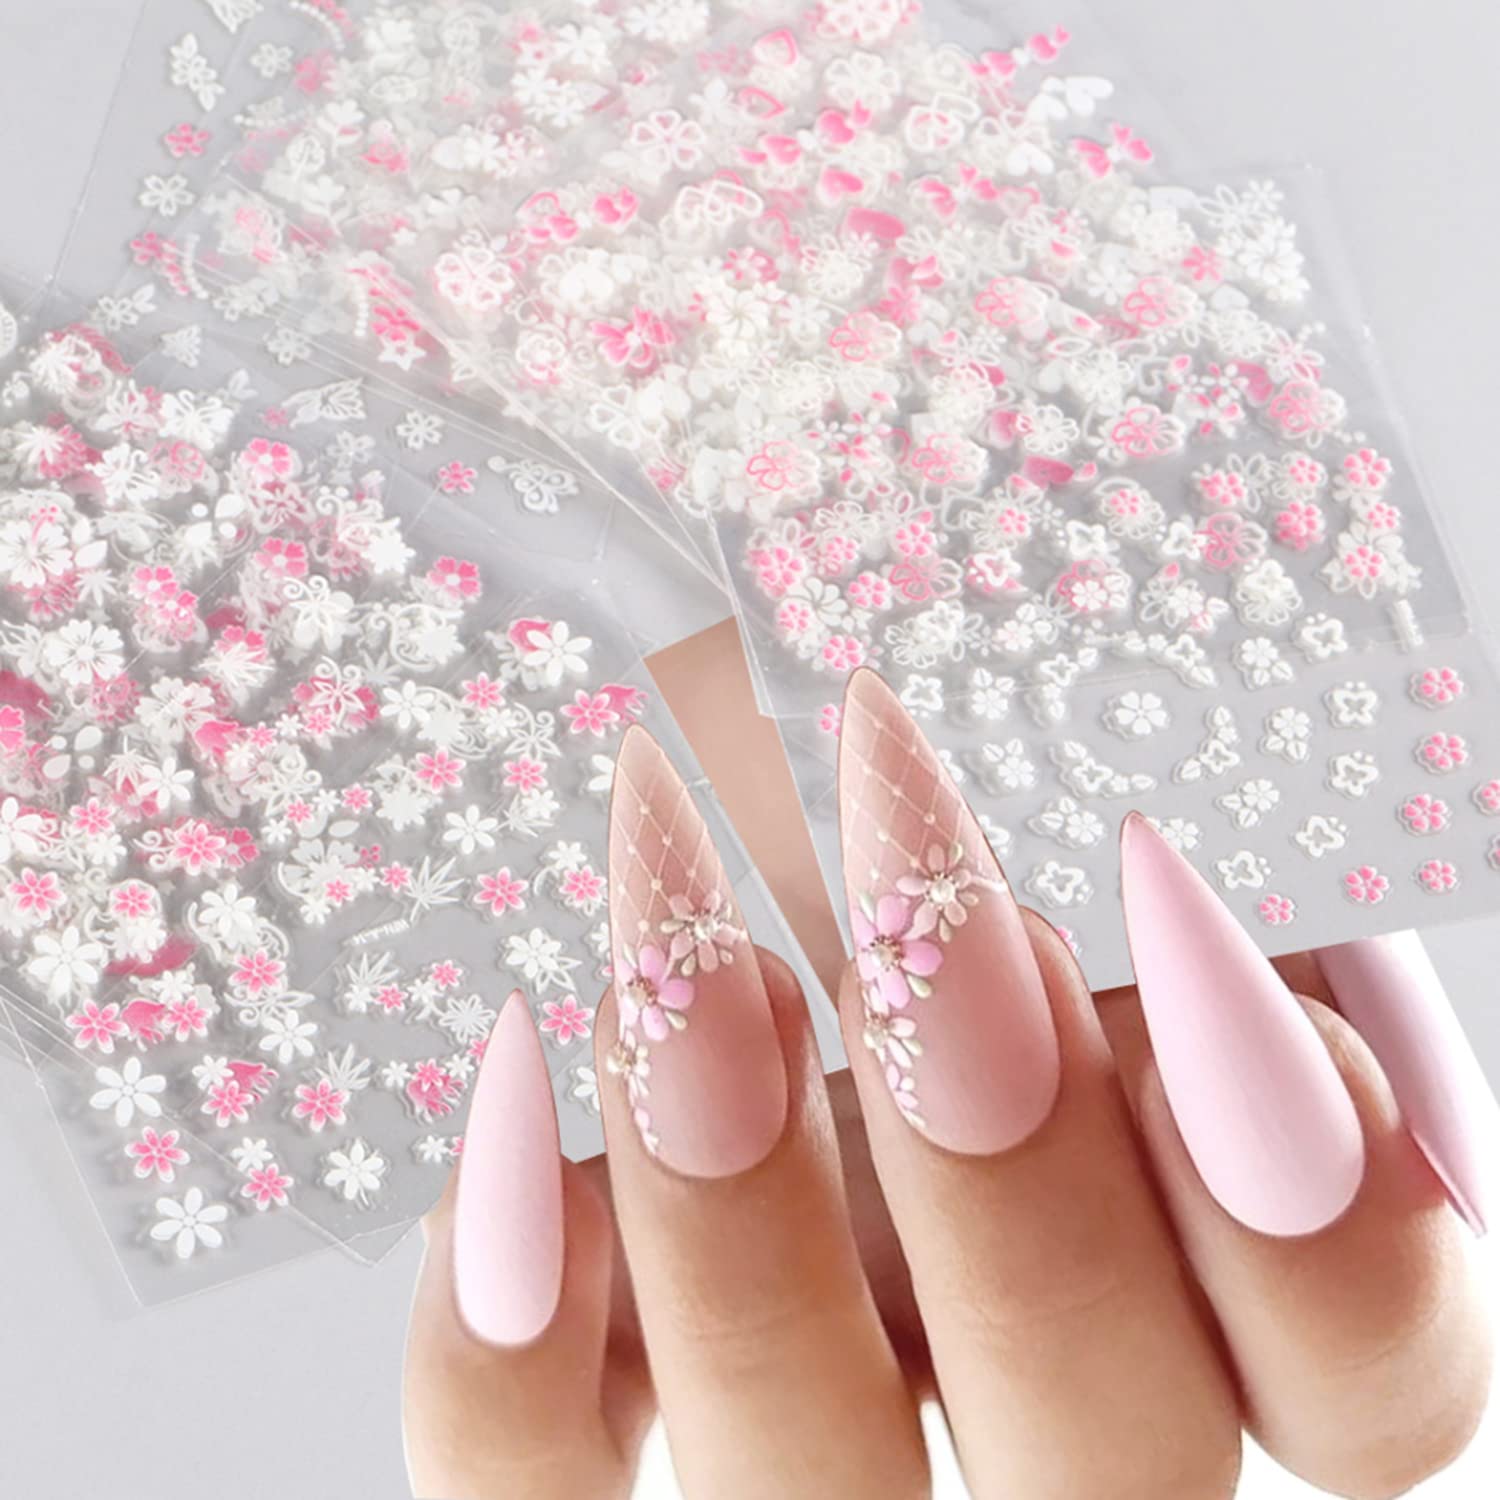 White Flower Nail Art Stickers 3D Self Adhesive Flower Nail Decals